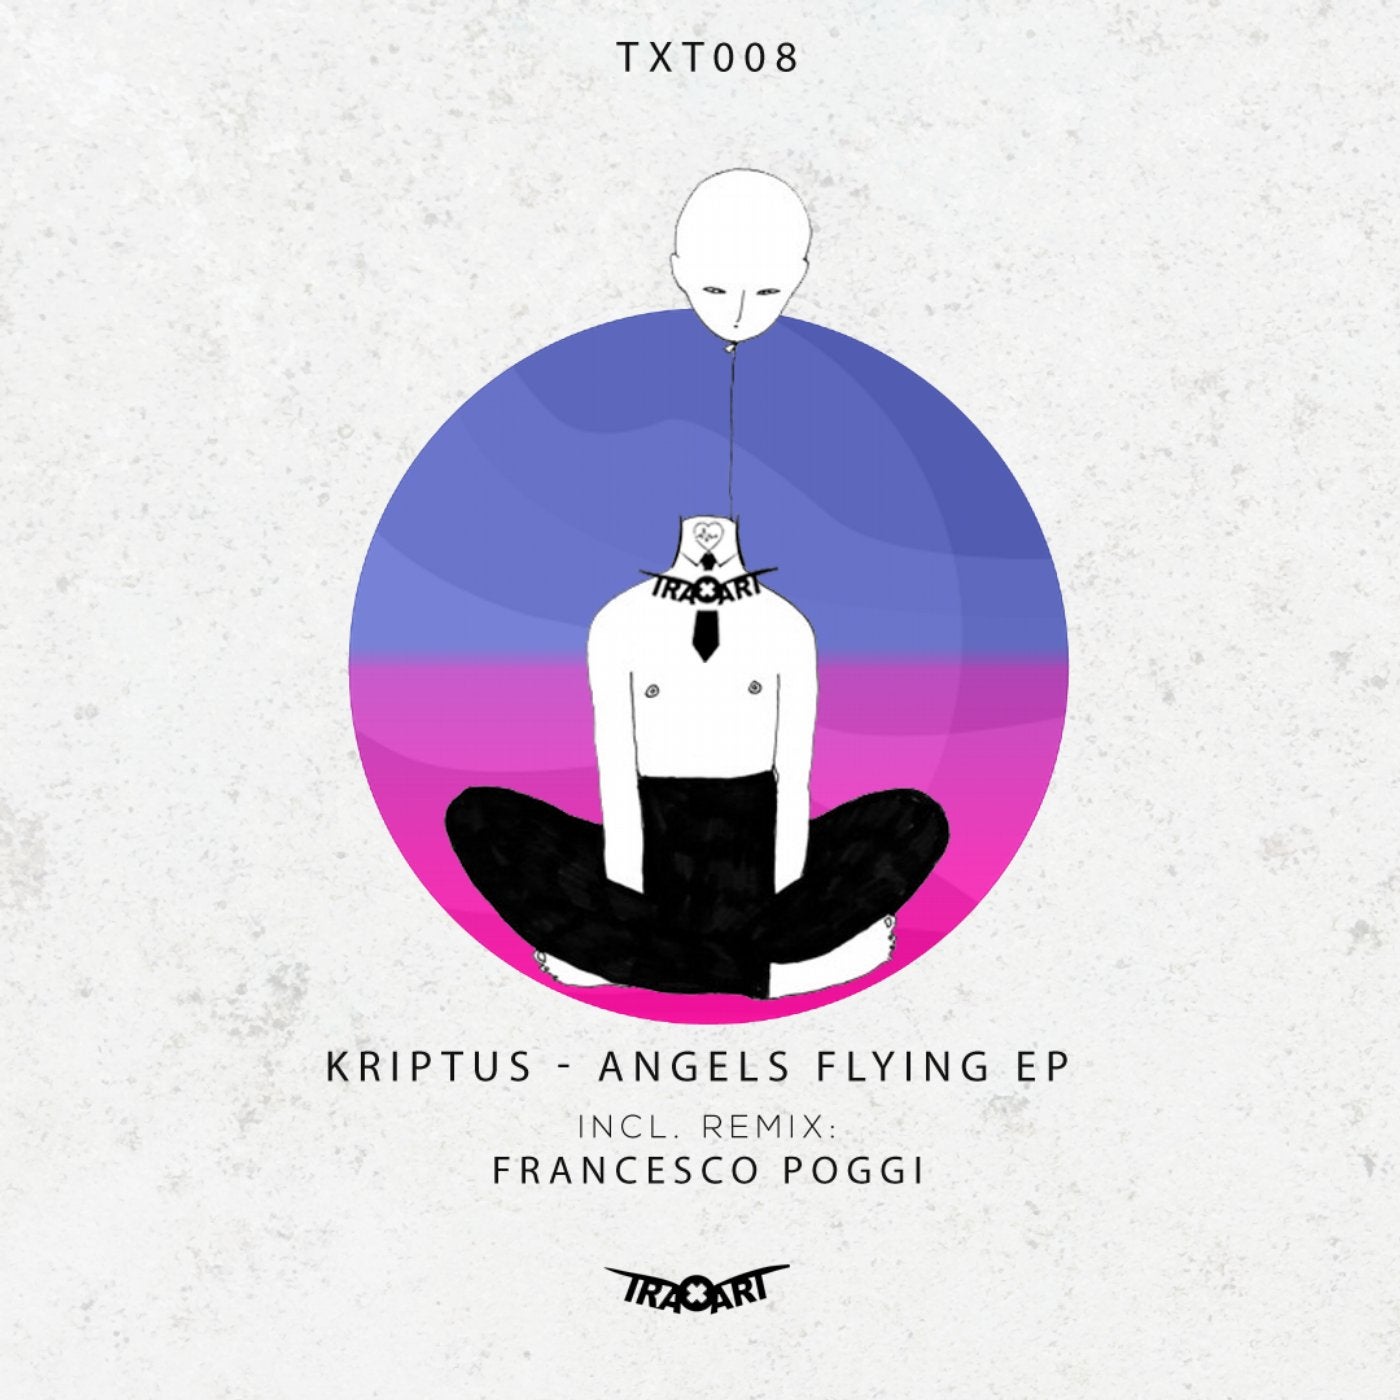 ANGELS FLYING EP